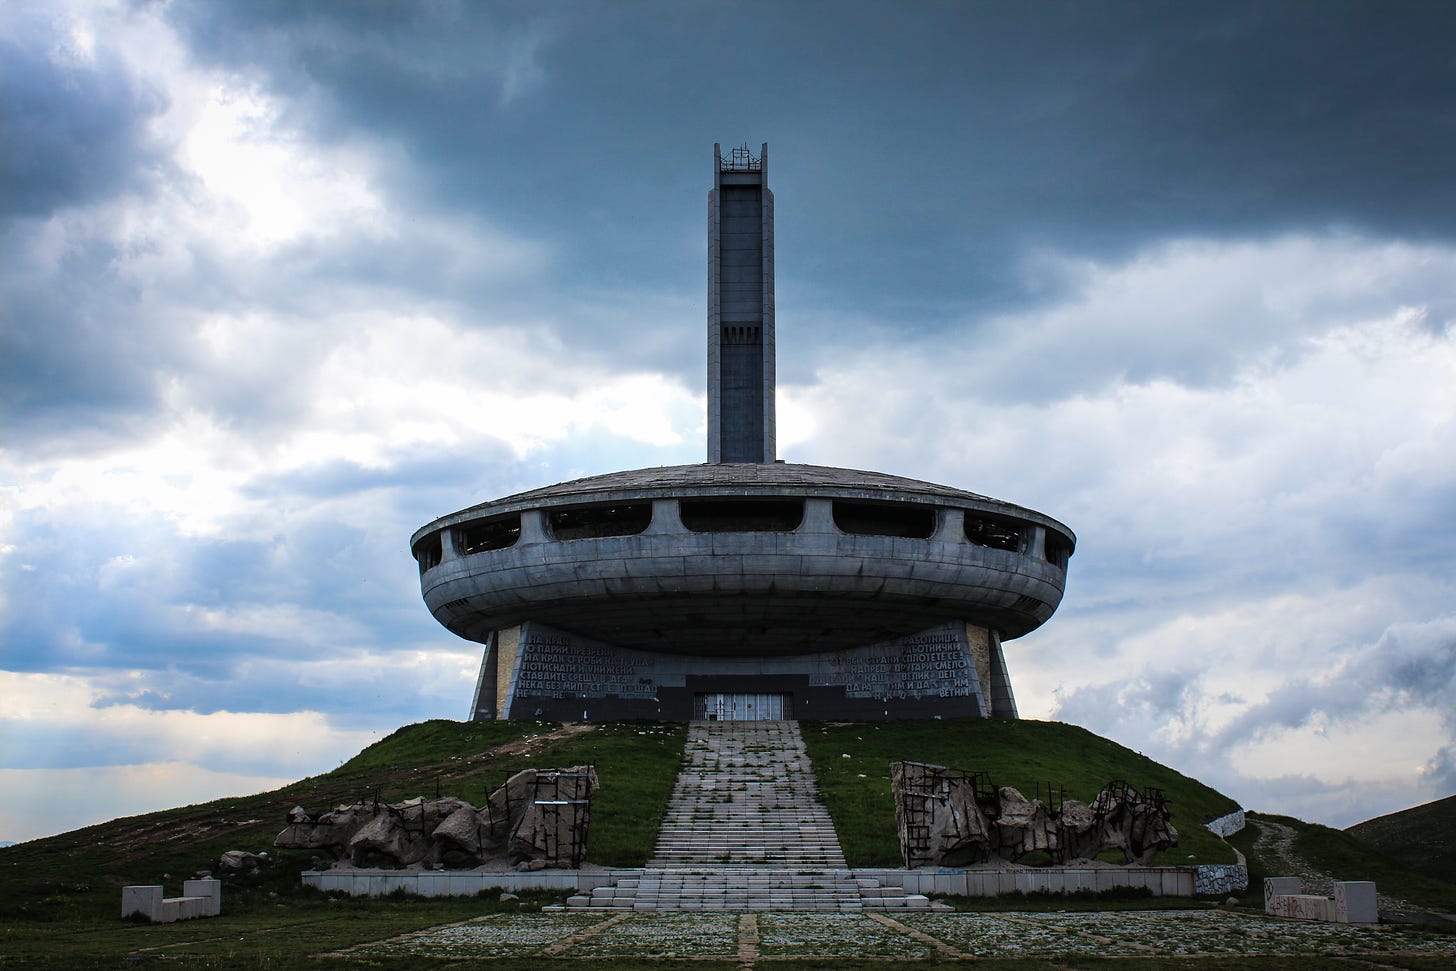 The subject of my PhD: the Buzludzha Memorial House in Bulgaria. Designed by architect Georgi Stoilov and opened in 1981.